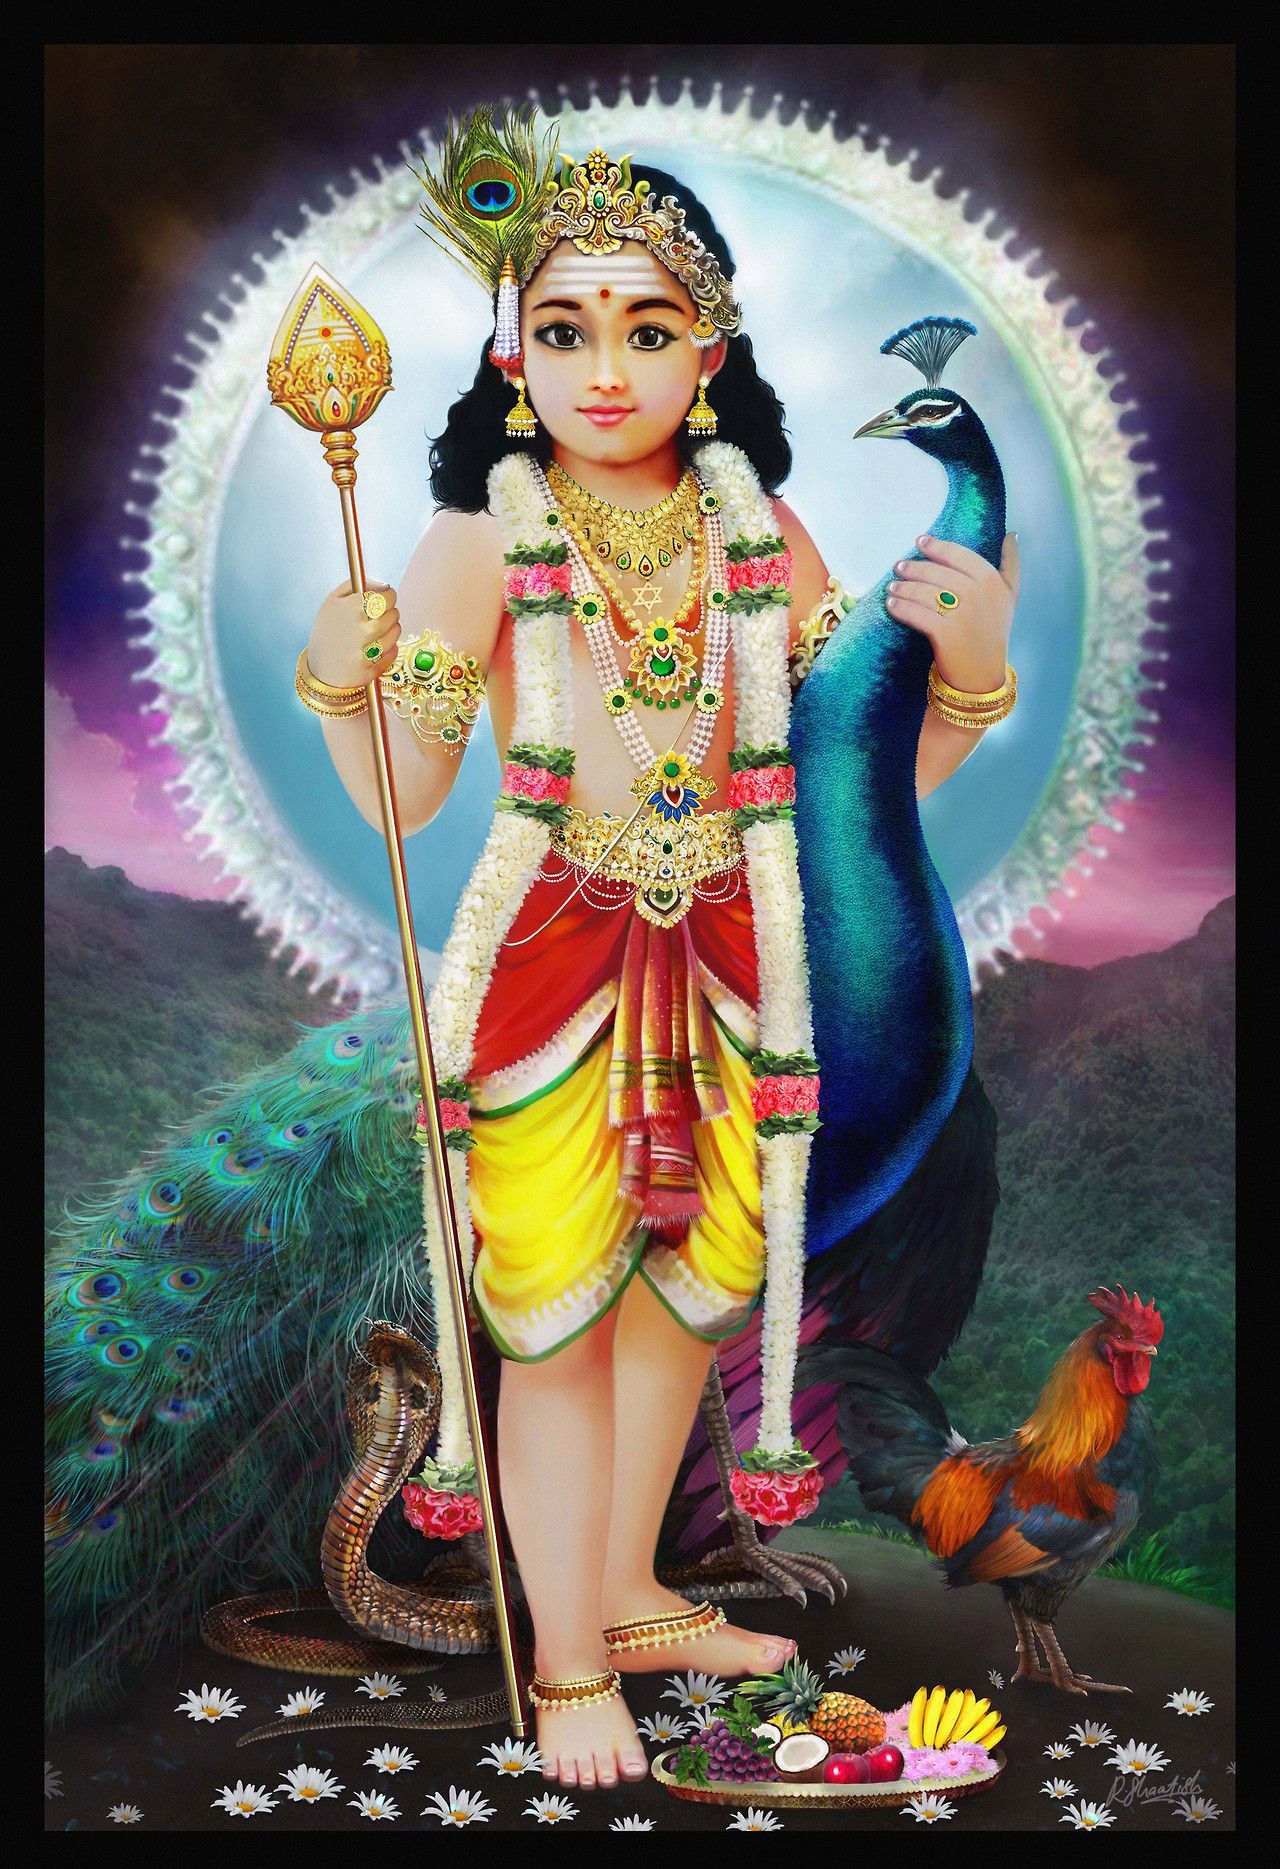 Lord Murugan Live Wallpapers 1.2 APK Download - Android Lifestyle Apps